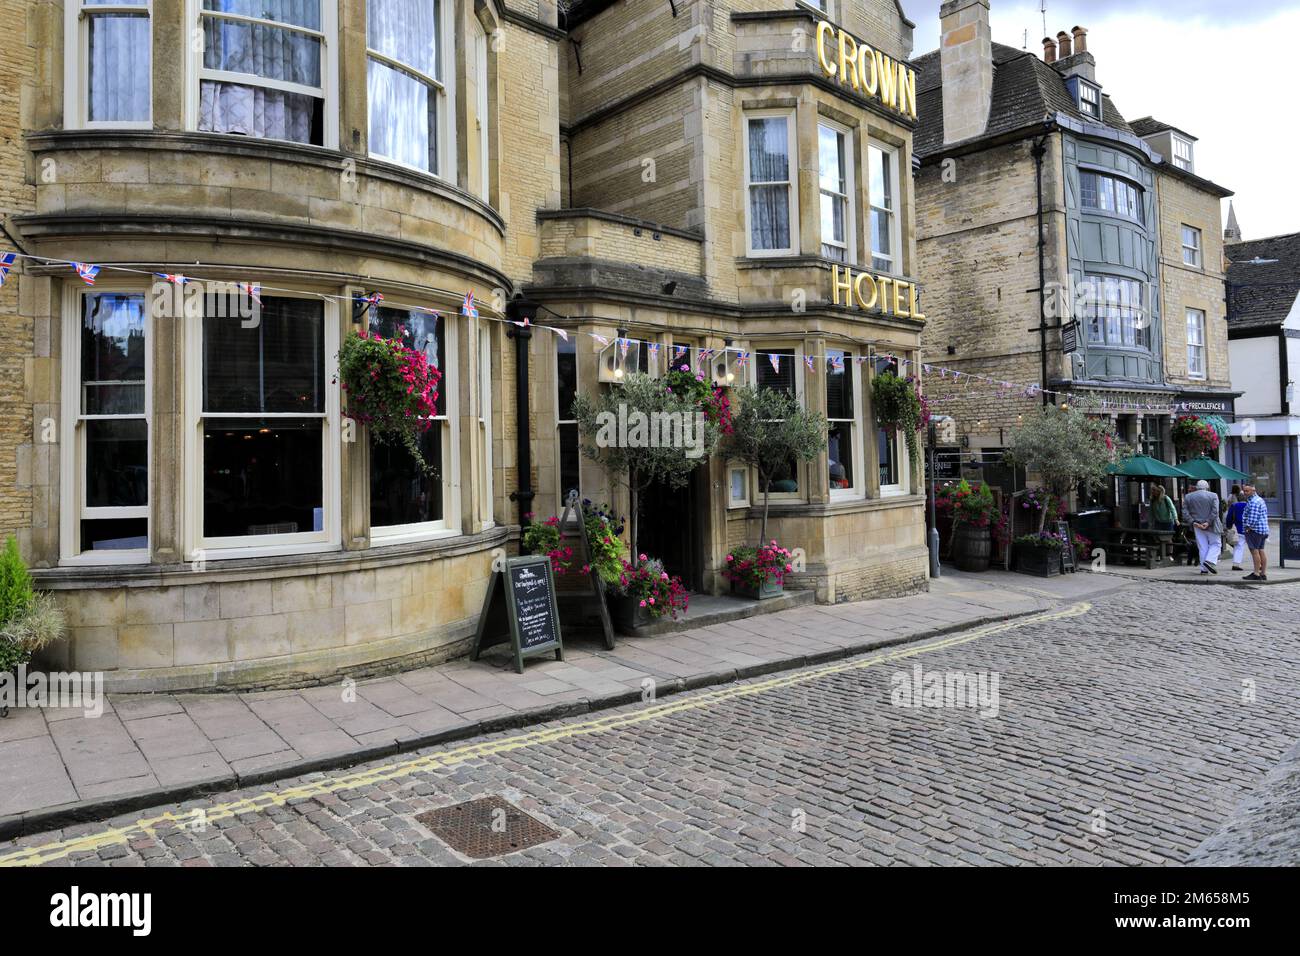 The Crown Hotel, Red Lion Square; Stamford Town, Lincolnshire County, England, UK Stock Photo